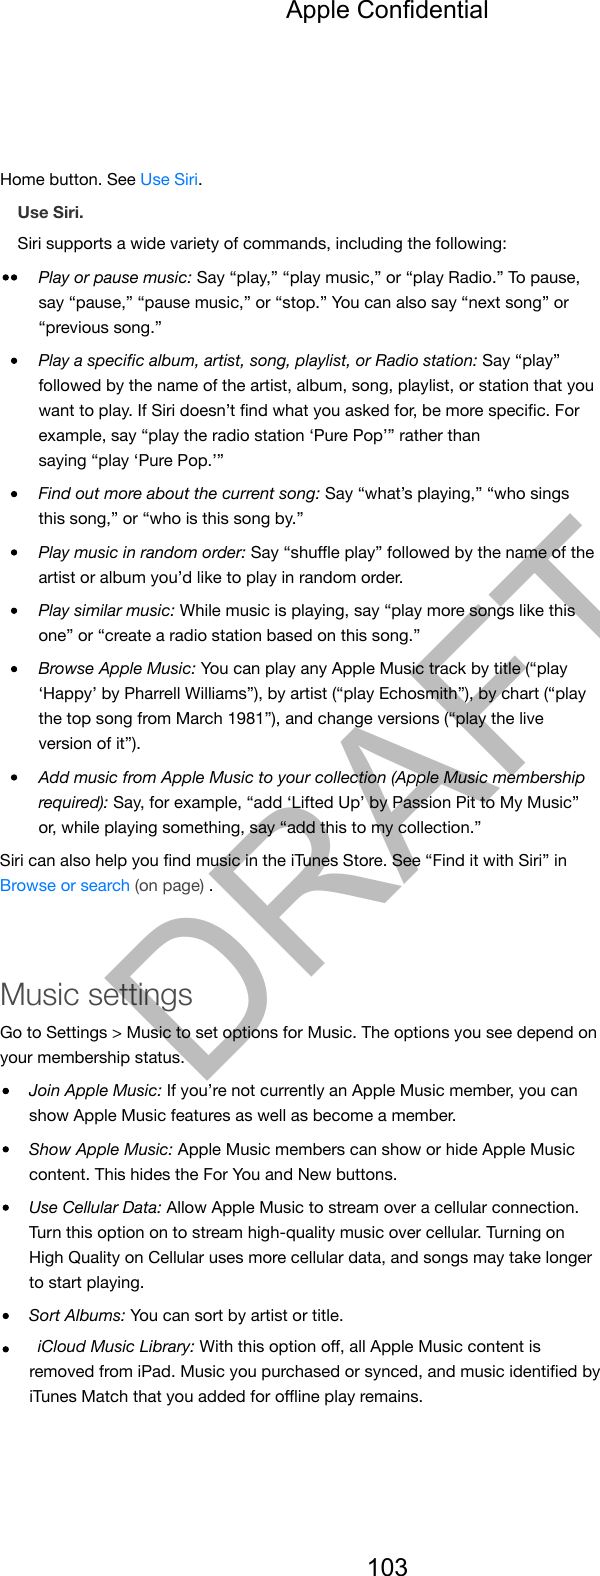 Home button. See Use Siri.Use Siri.Siri supports a wide variety of commands, including the following:Play or pause music: Say “play,” “play music,” or “play Radio.” To pause,say “pause,” “pause music,” or “stop.” You can also say “next song” or“previous song.”Play a speciﬁc album, artist, song, playlist, or Radio station: Say “play”followed by the name of the artist, album, song, playlist, or station that youwant to play. If Siri doesn’t ﬁnd what you asked for, be more speciﬁc. Forexample, say “play the radio station ‘Pure Pop’” rather thansaying “play ‘Pure Pop.’”Find out more about the current song: Say “what’s playing,” “who singsthis song,” or “who is this song by.”Play music in random order: Say “shuﬄe play” followed by the name of theartist or album you’d like to play in random order.Play similar music: While music is playing, say “play more songs like thisone” or “create a radio station based on this song.”Browse Apple Music: You can play any Apple Music track by title (“play‘Happy’ by Pharrell Williams”), by artist (“play Echosmith”), by chart (“playthe top song from March 1981”), and change versions (“play the liveversion of it”).Add music from Apple Music to your collection (Apple Music membershiprequired): Say, for example, “add ‘Lifted Up’ by Passion Pit to My Music”or, while playing something, say “add this to my collection.”Siri can also help you ﬁnd music in the iTunes Store. See “Find it with Siri” inBrowse or search (on page) .Music settingsGo to Settings &gt; Music to set options for Music. The options you see depend onyour membership status.Join Apple Music: If you’re not currently an Apple Music member, you canshow Apple Music features as well as become a member.Show Apple Music: Apple Music members can show or hide Apple Musiccontent. This hides the For You and New buttons.Use Cellular Data: Allow Apple Music to stream over a cellular connection.Turn this option on to stream high-quality music over cellular. Turning onHigh Quality on Cellular uses more cellular data, and songs may take longerto start playing.Sort Albums: You can sort by artist or title.iCloud Music Library: With this option oﬀ, all Apple Music content isremoved from iPad. Music you purchased or synced, and music identiﬁed byiTunes Match that you added for oﬄine play remains.Apple Confidential103DRAFT